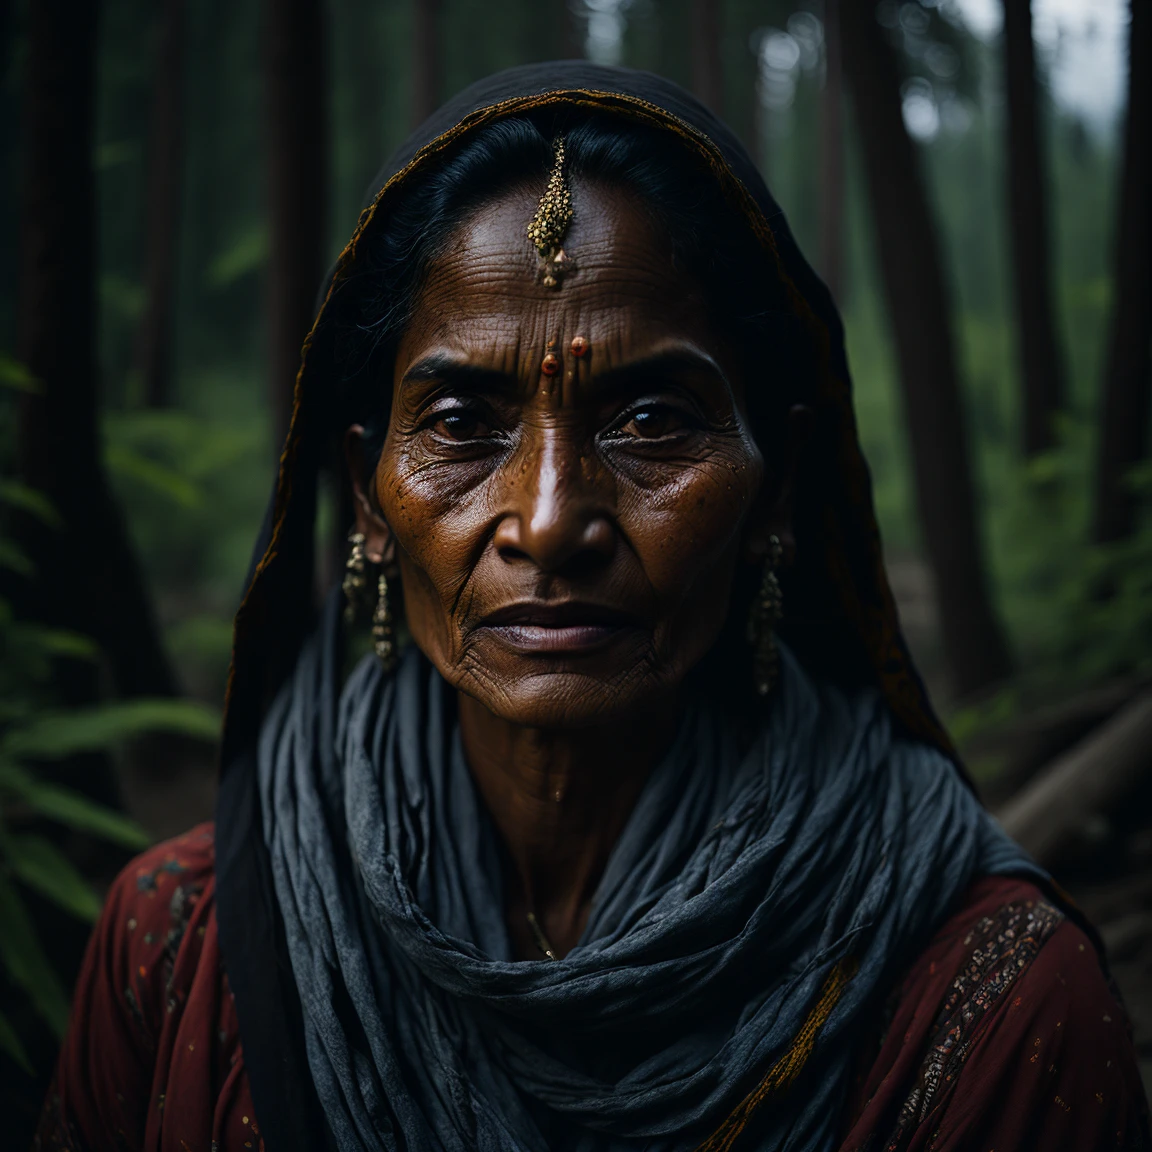 portrait oF an indian village woman in Forest in Himachal pradesh, clear Facial Features, 電影, 35mm 镜头, F/1.8, 重点照明, 全局照明